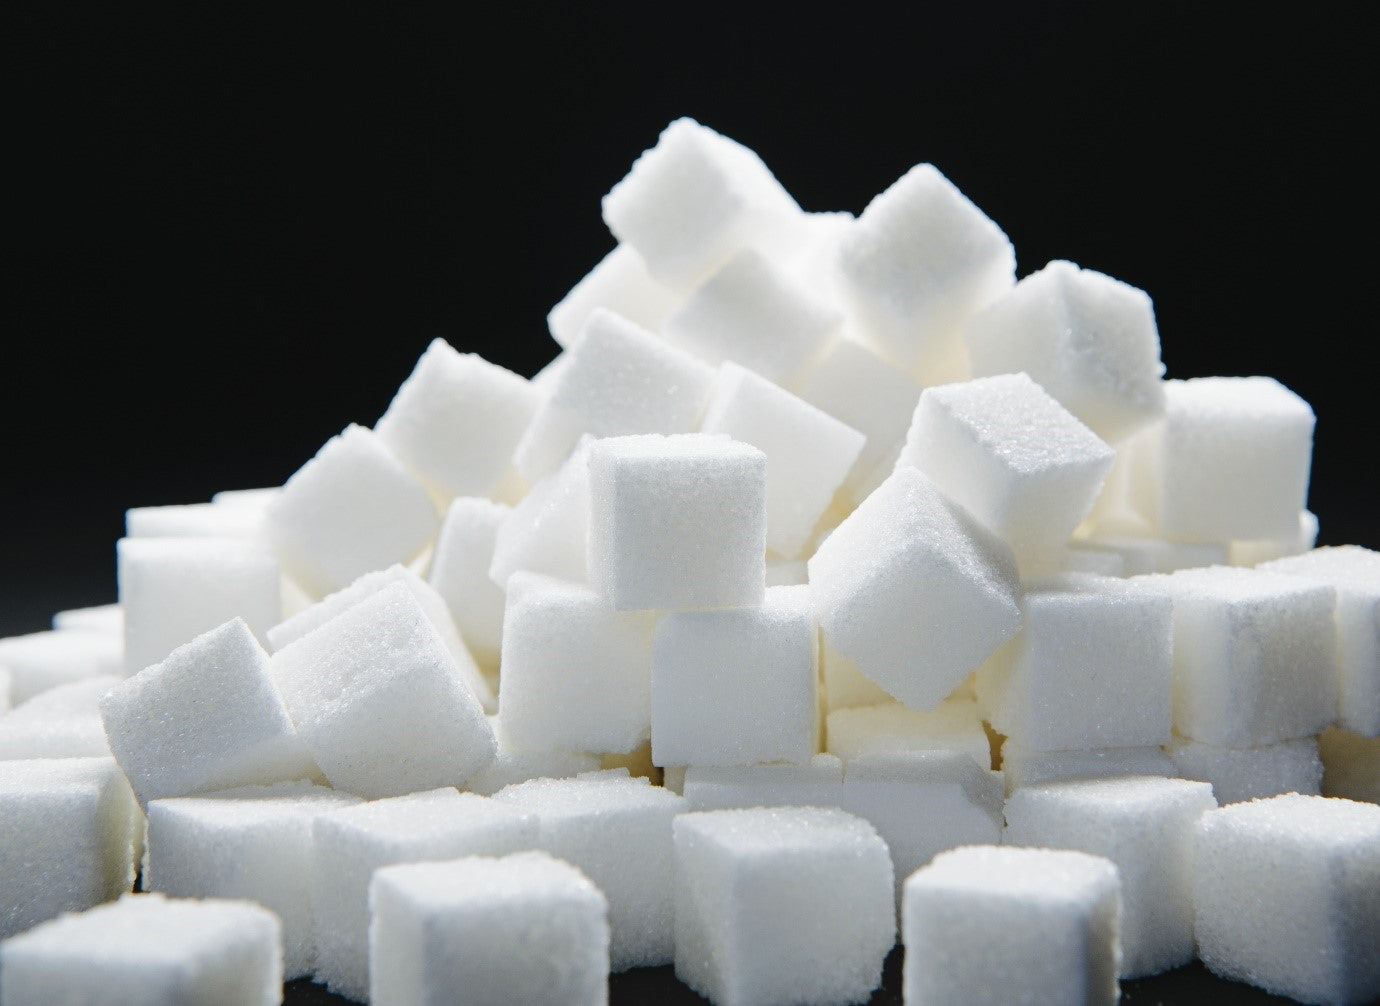 Are you addicted to Sugar?